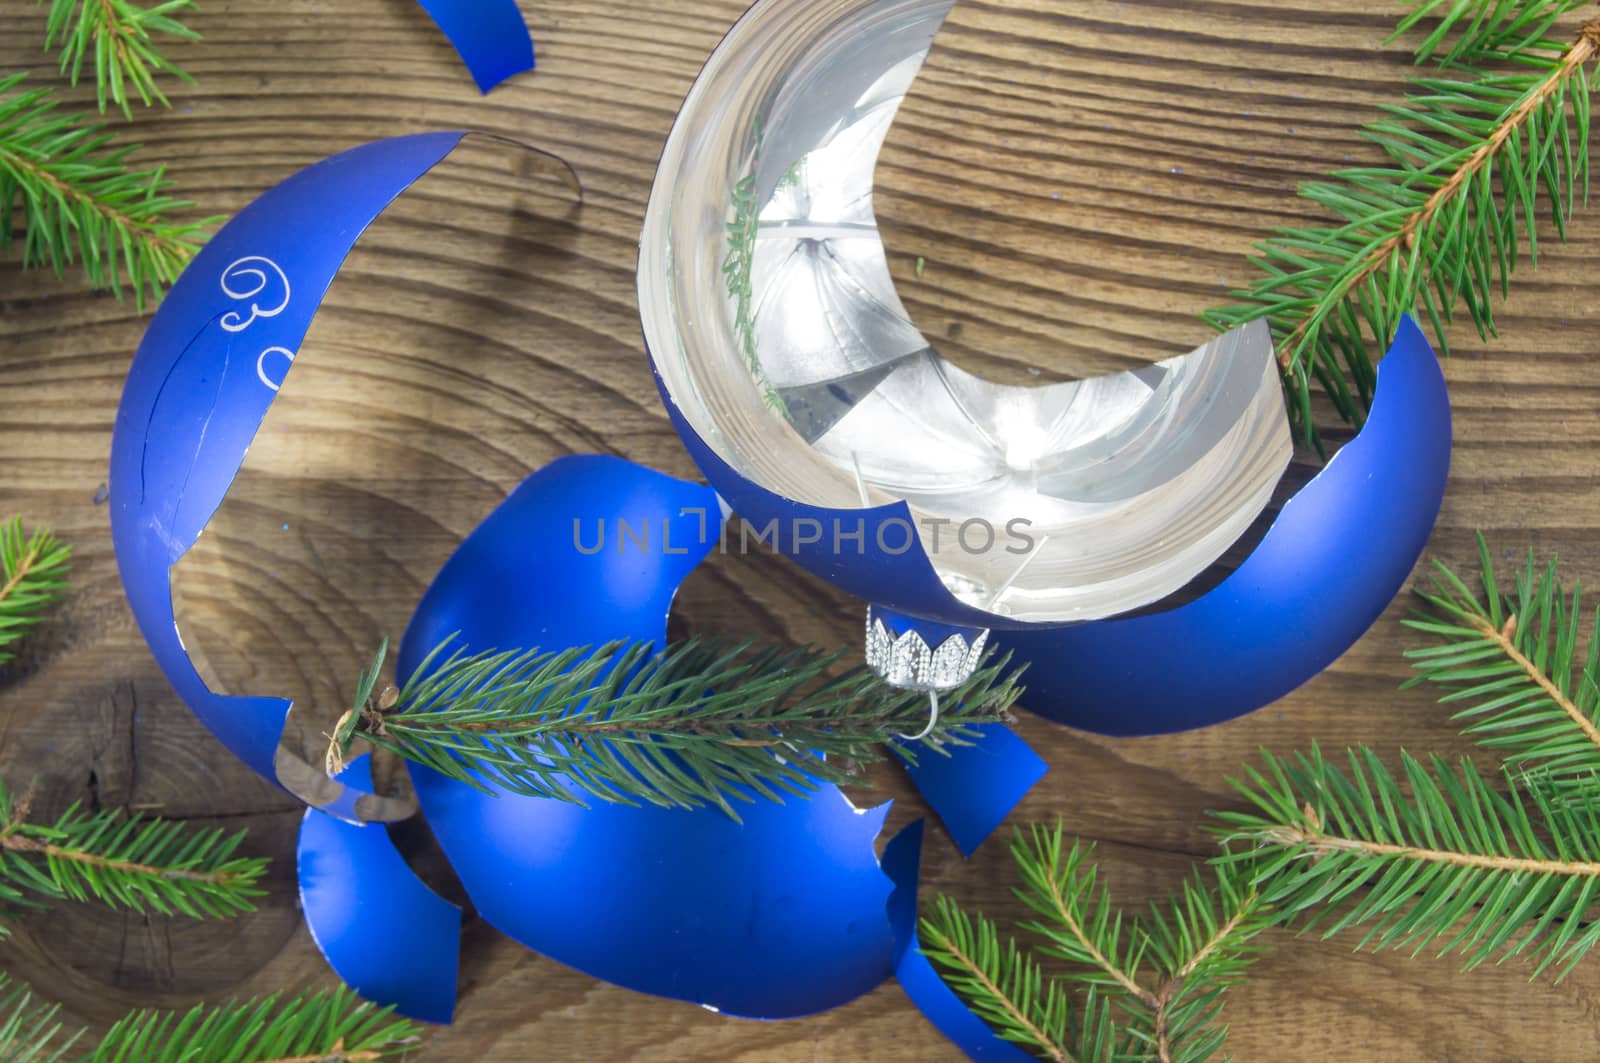 Broken Christmas Toy on wooden background. For your commercial and editorial use